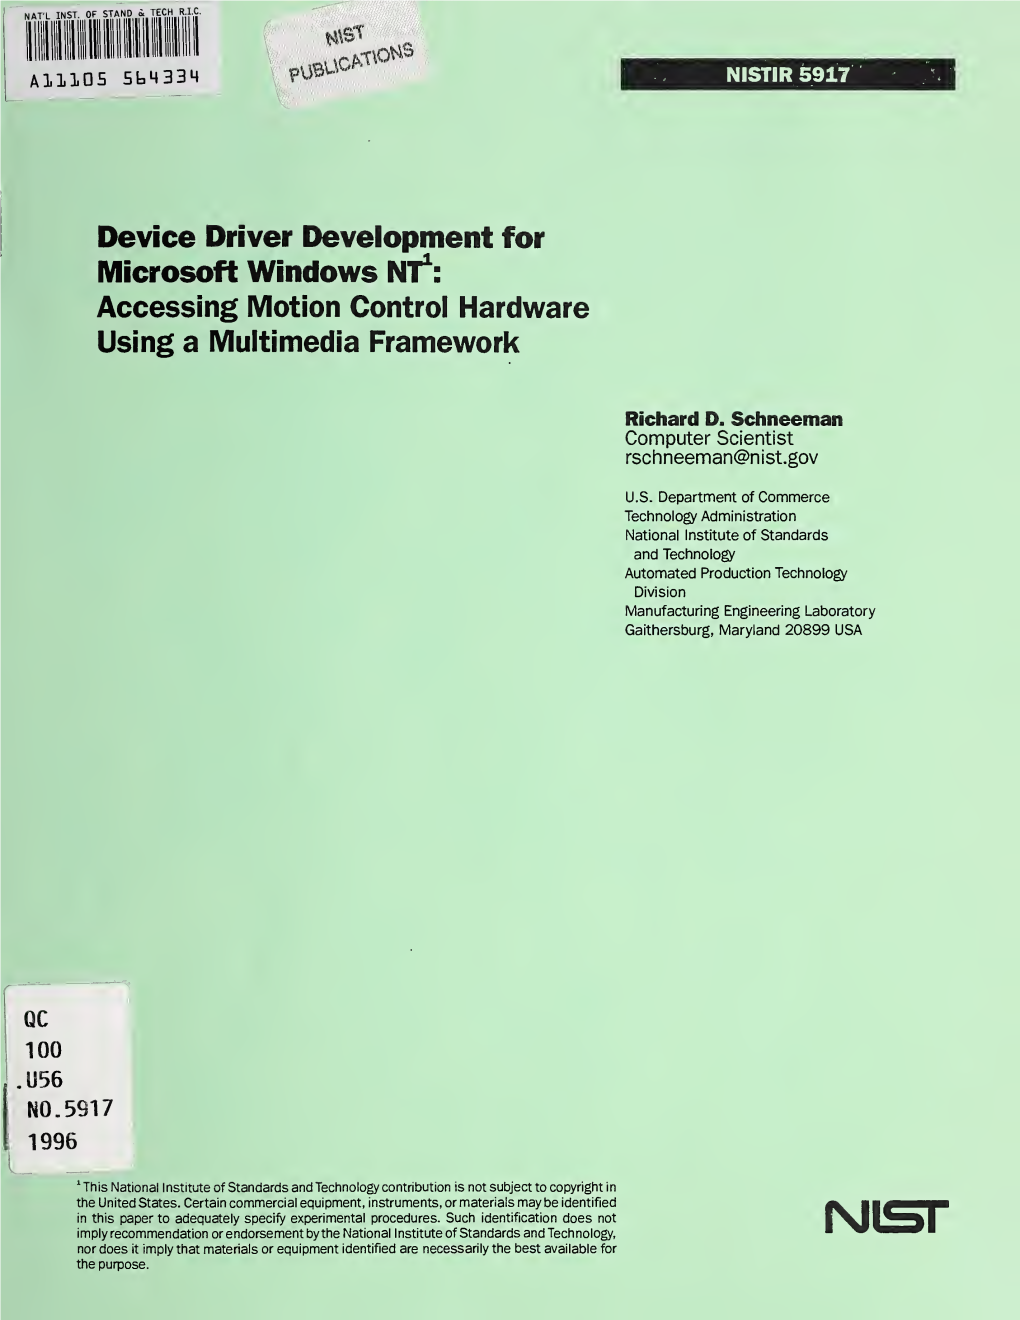 Device Driver Development for Microsoft Windows NT1: Accessing